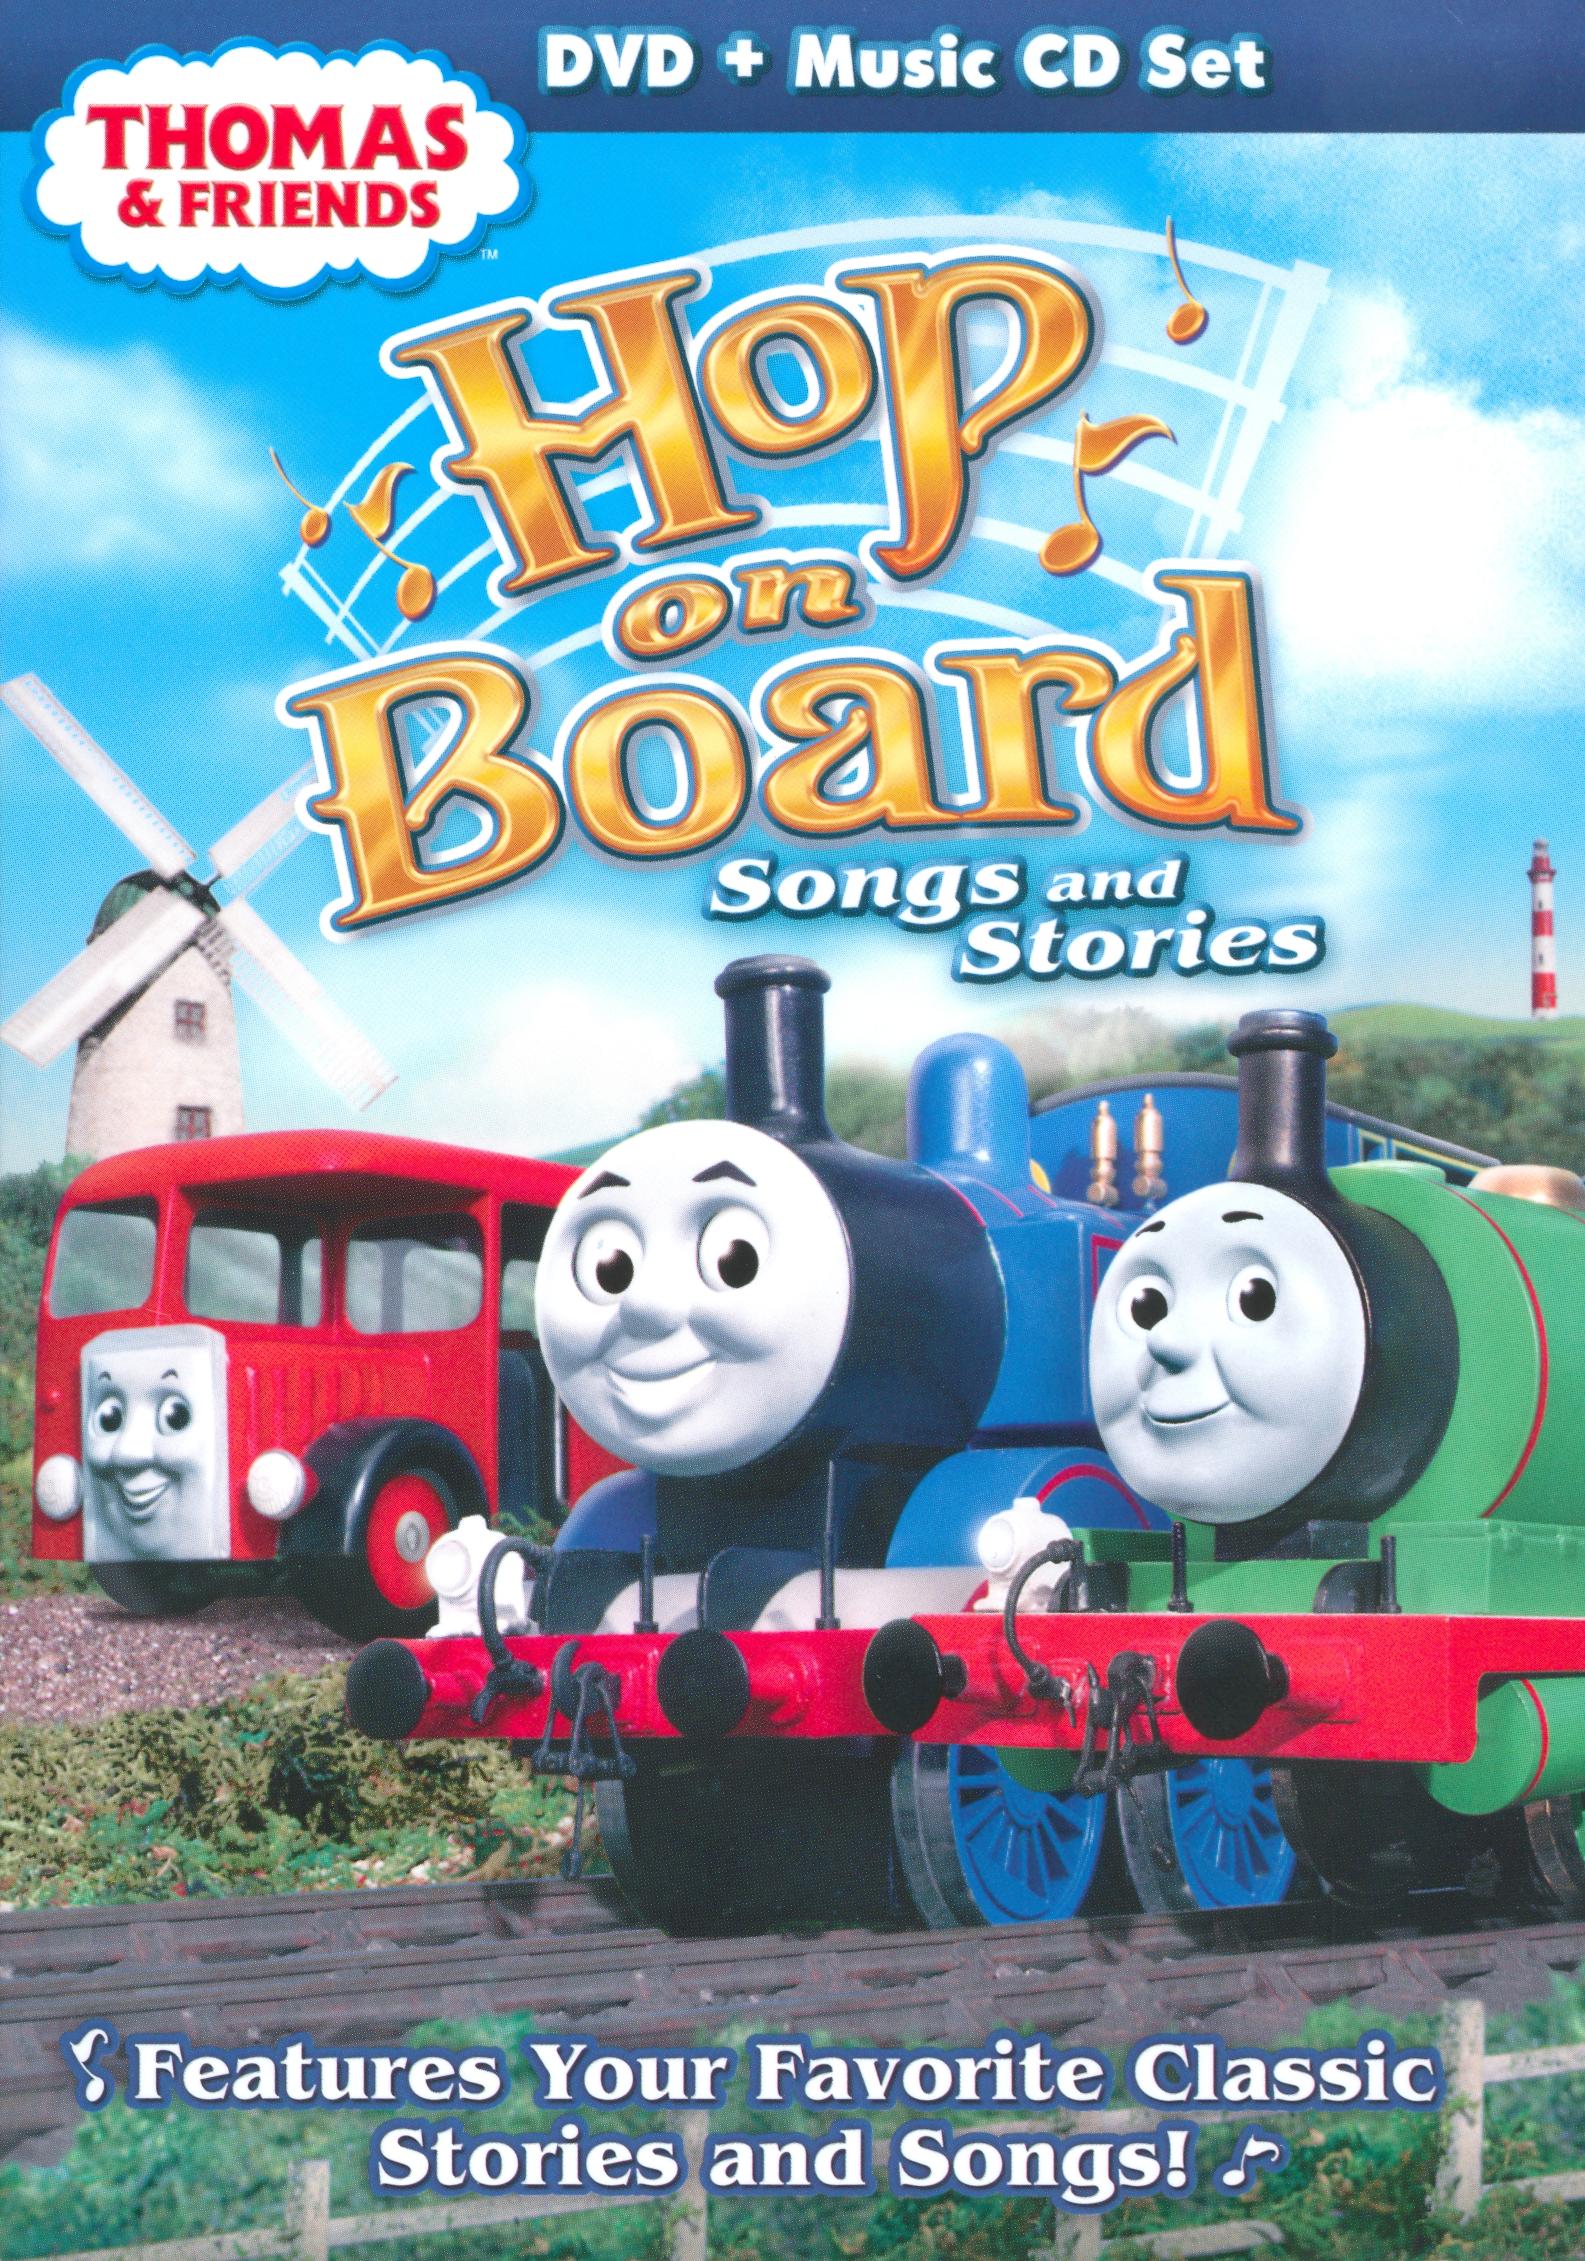 Sing-Along and Stories | Thomas the Tank Engine Wikia | Fandom